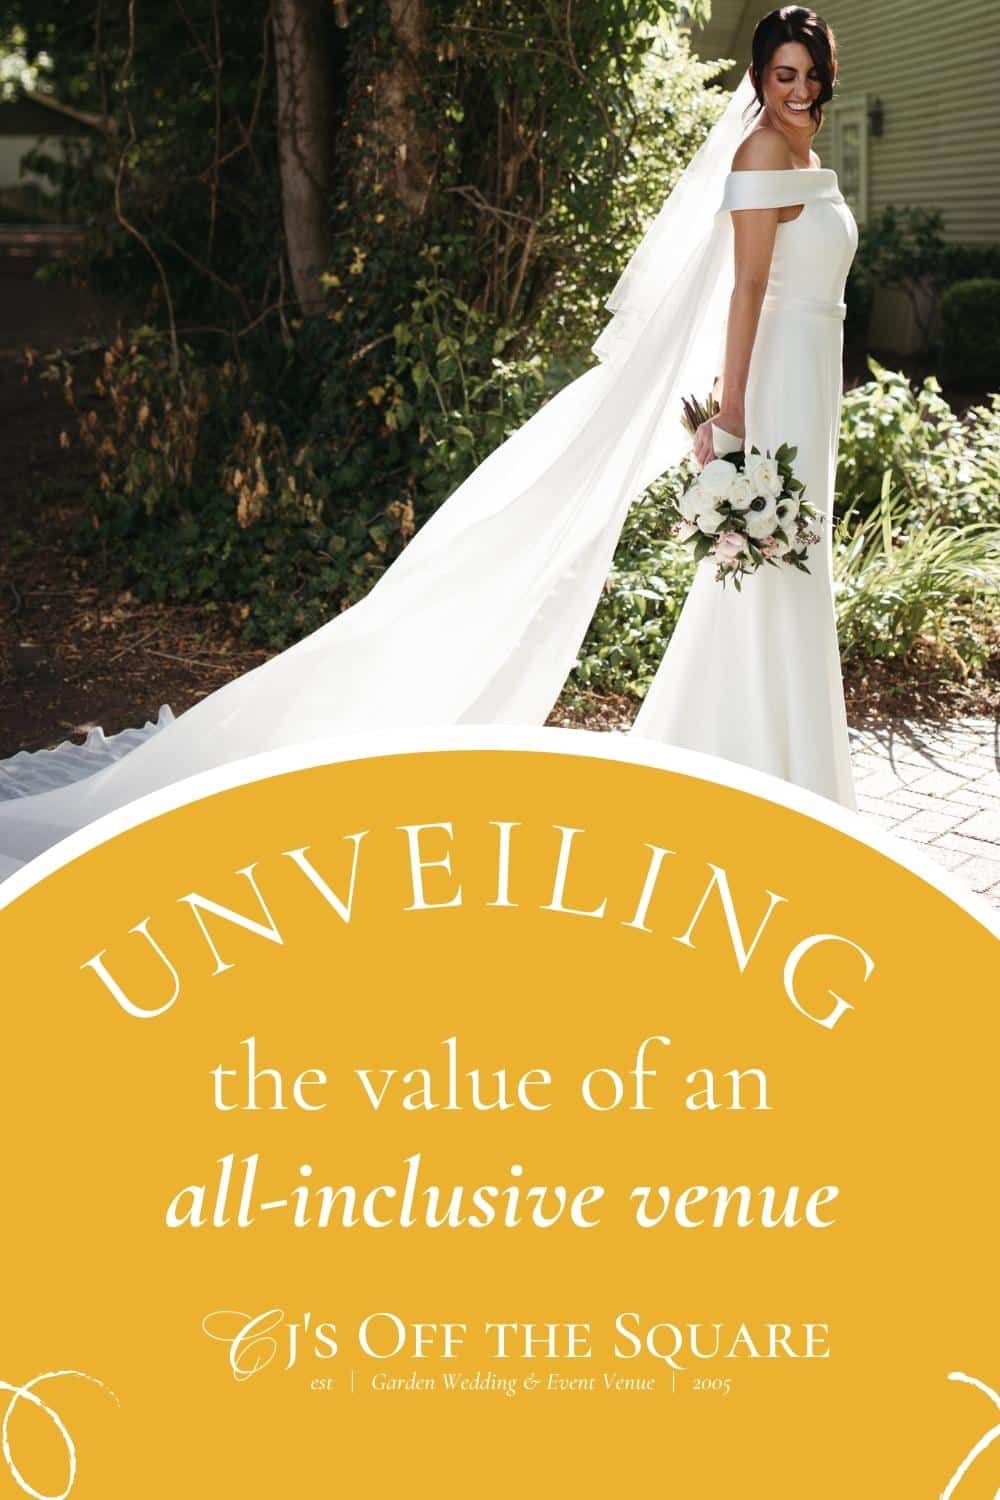 Unveiling the value of an all-inclusive wedding venue